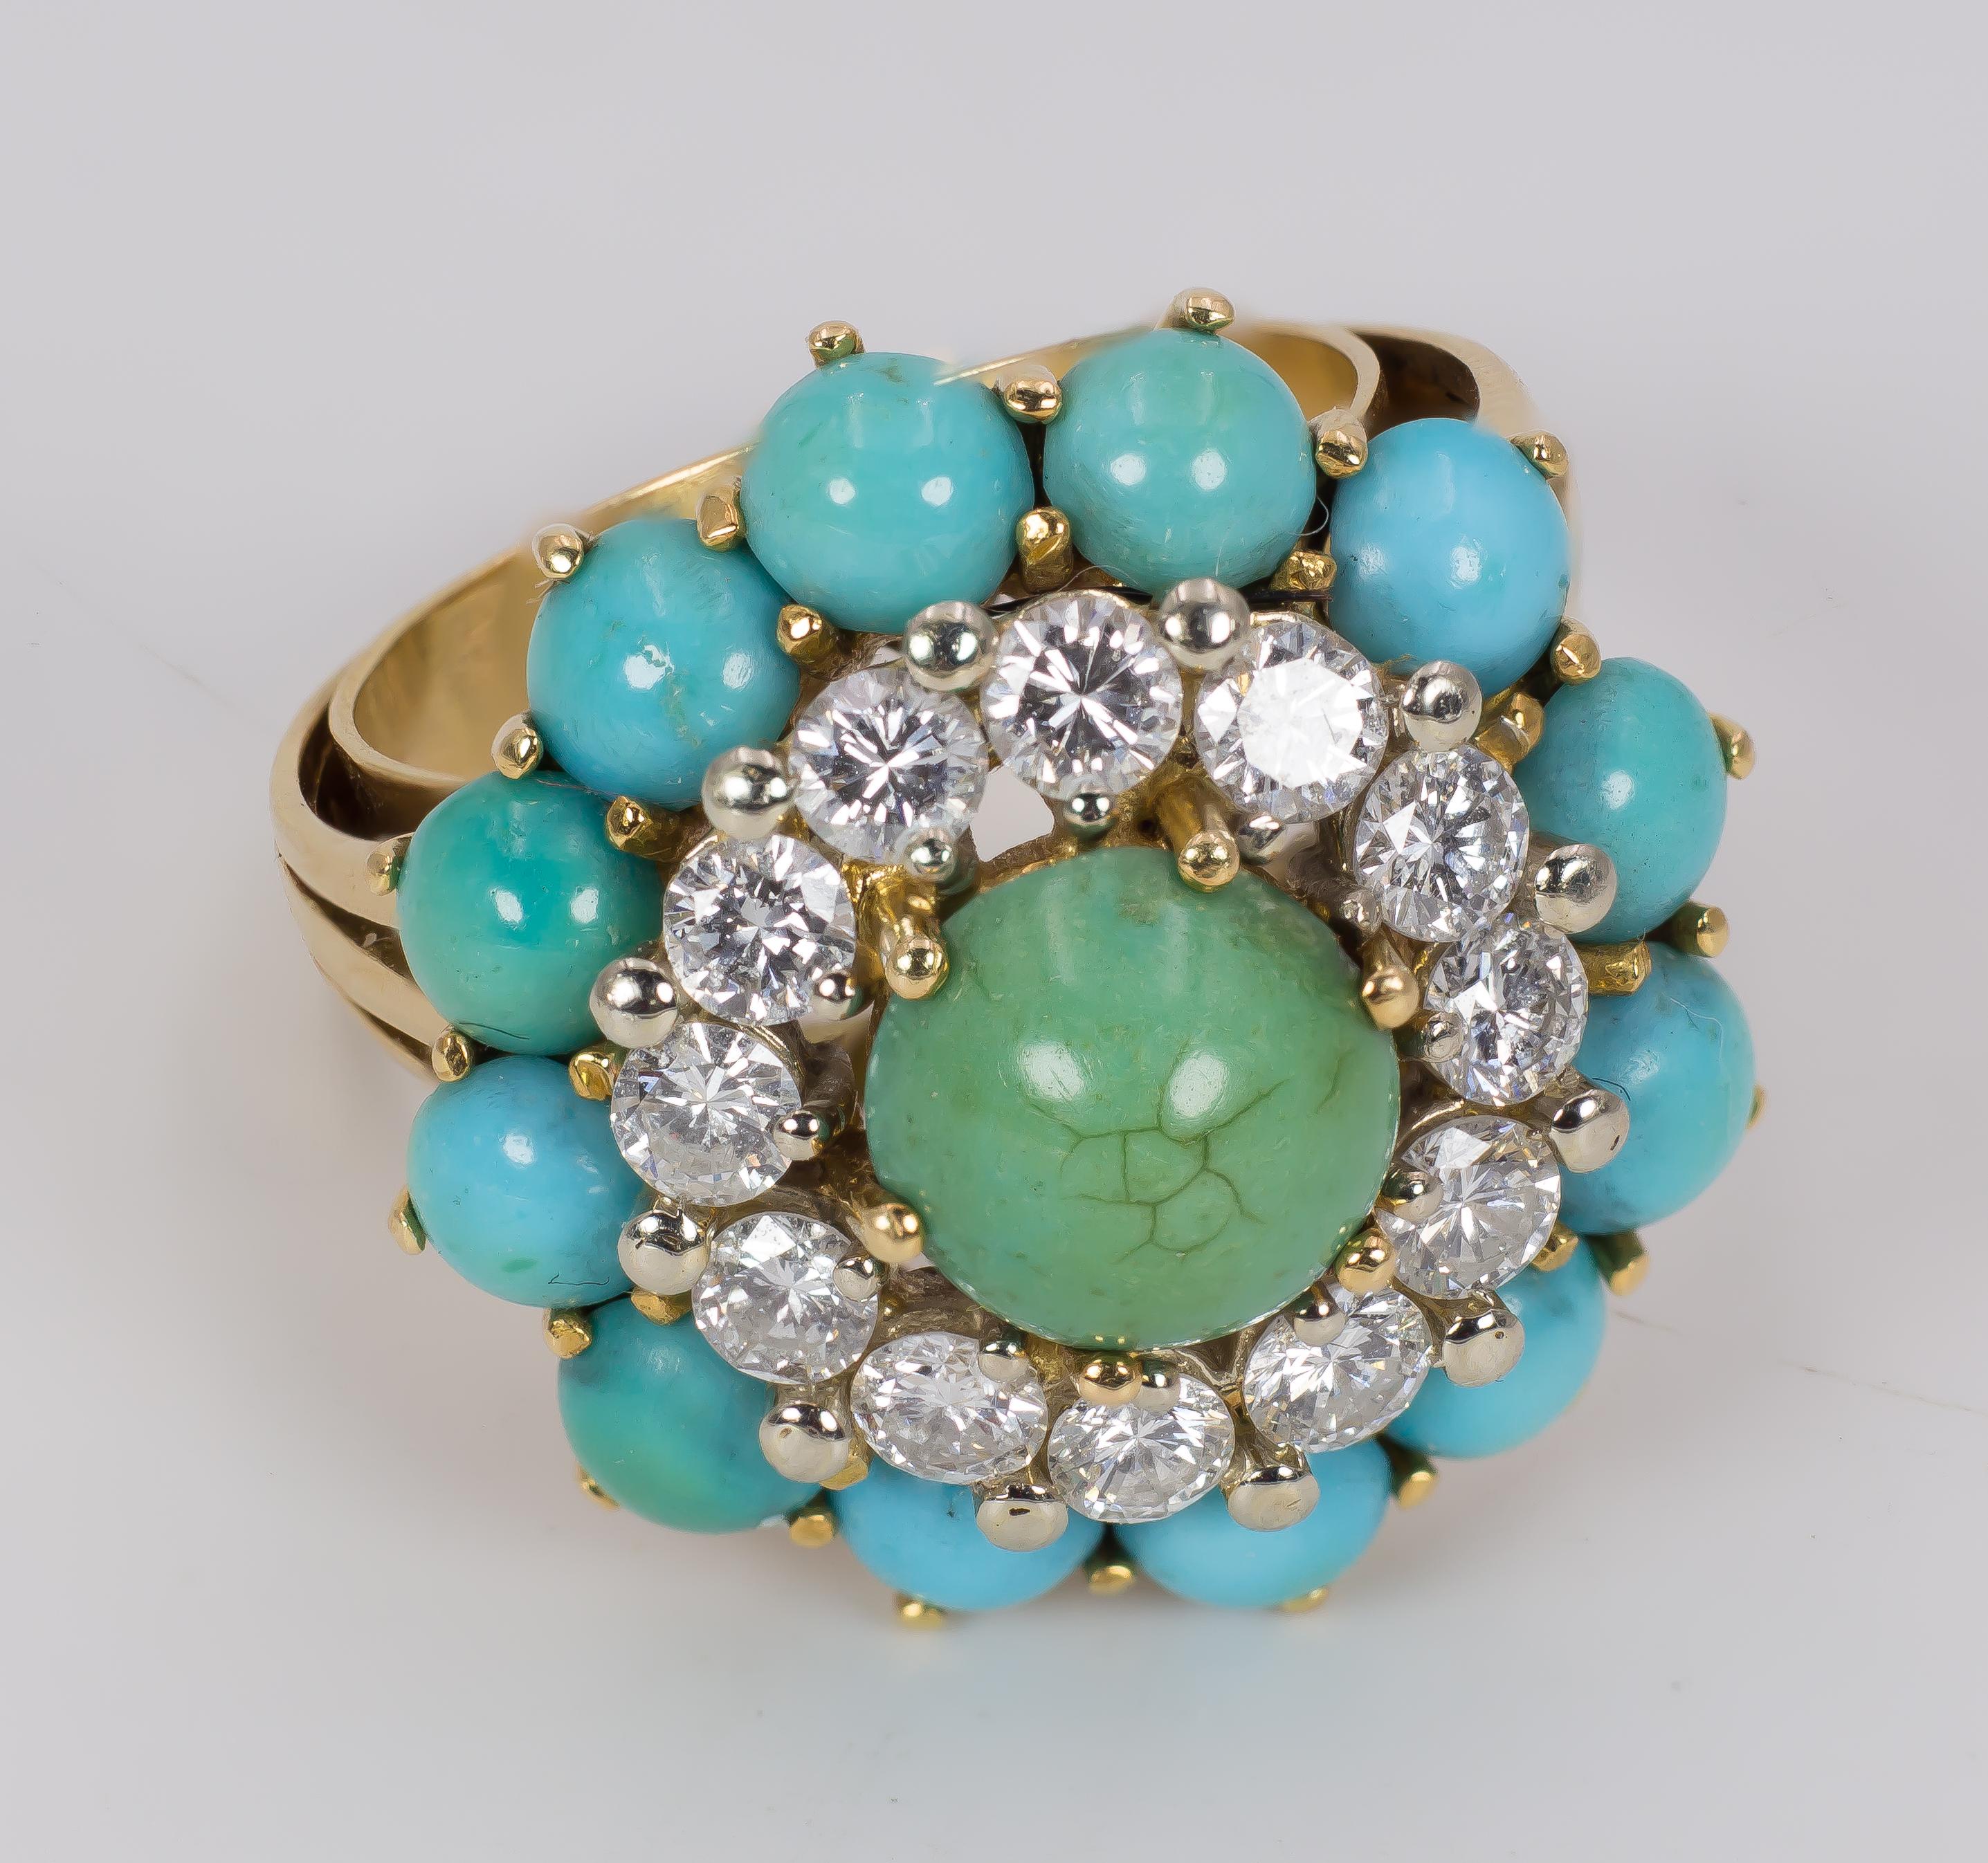 A vintage gold, diamond and turquoise ring, dating from the 1960s. This wonderful ring is set with a central turquoise, surrounded by twelve 0.10ct round cut diamonds, totalling 1.2ct, and by another crown of twelve turquoises. The ring is cradfted